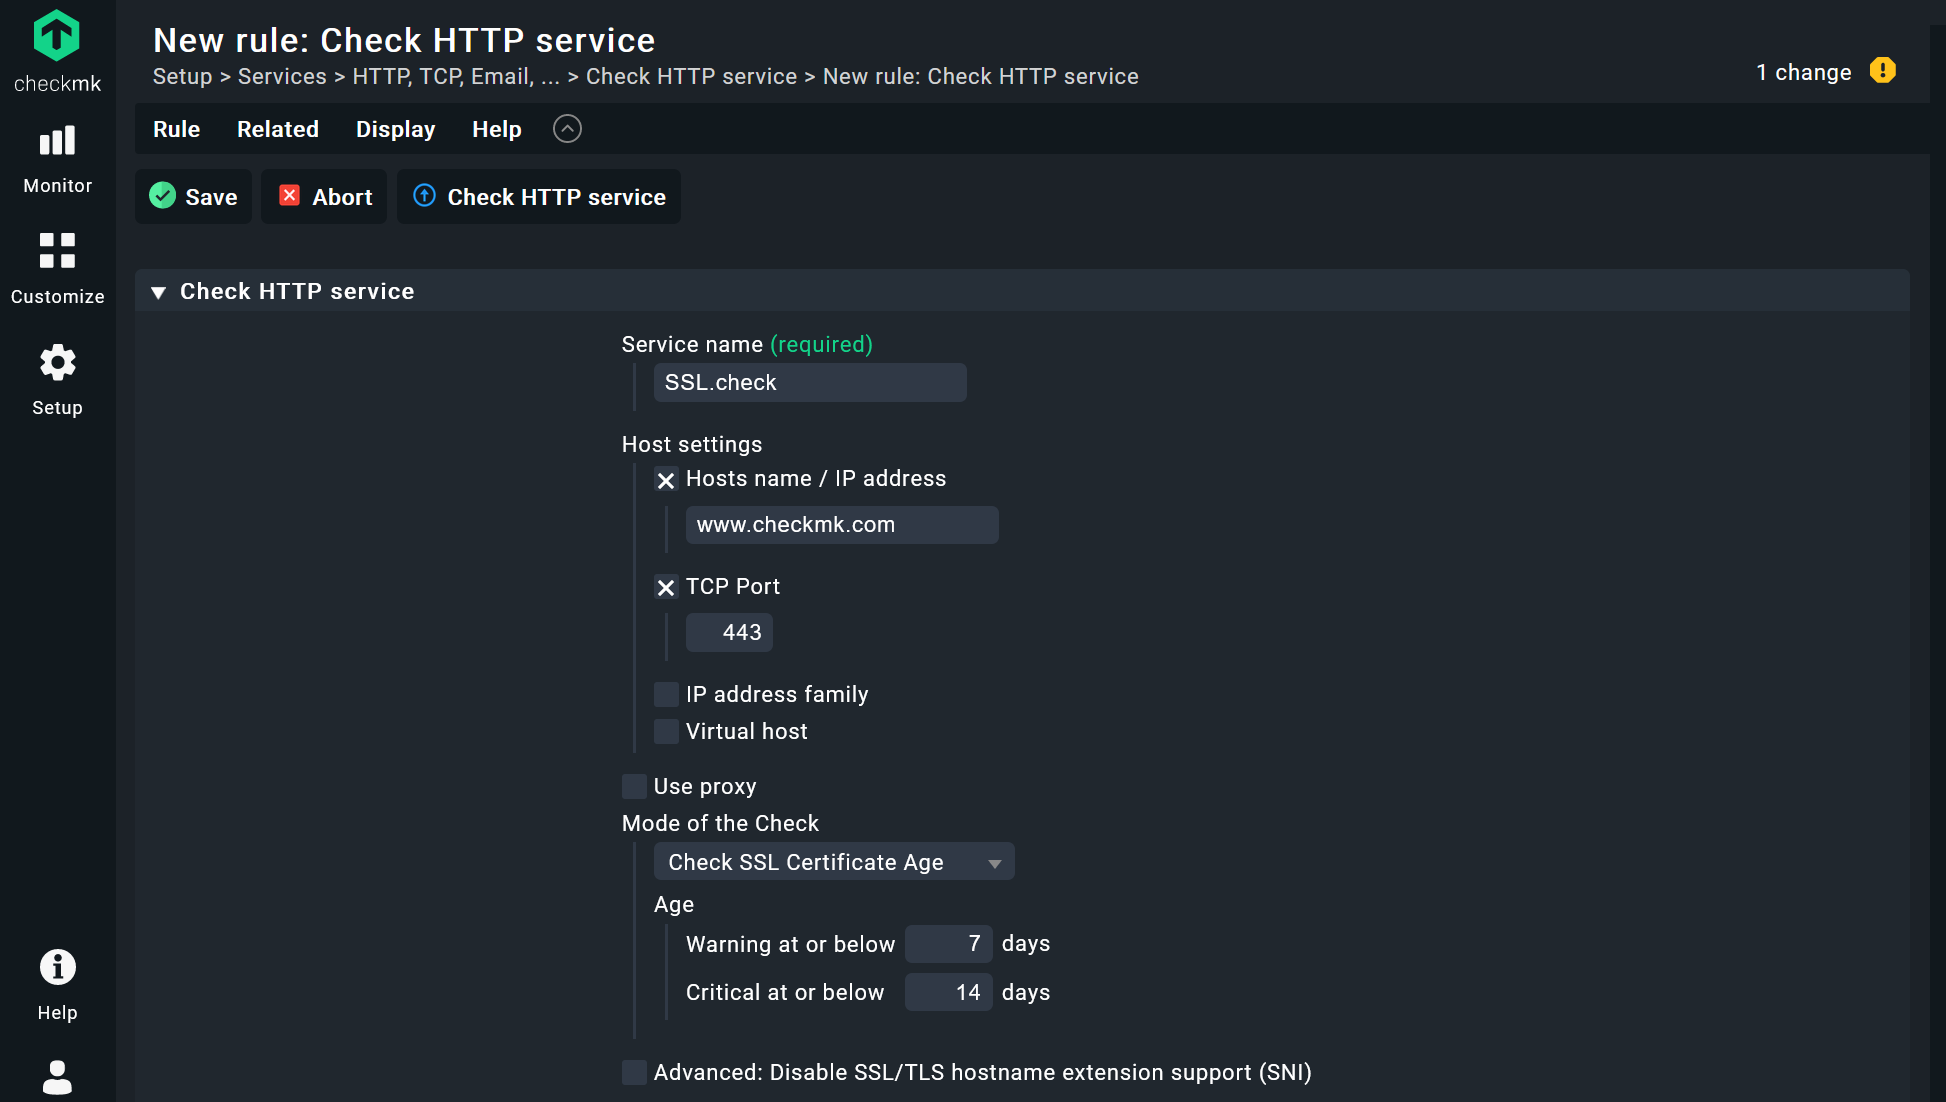 Add rule to check HTTP service